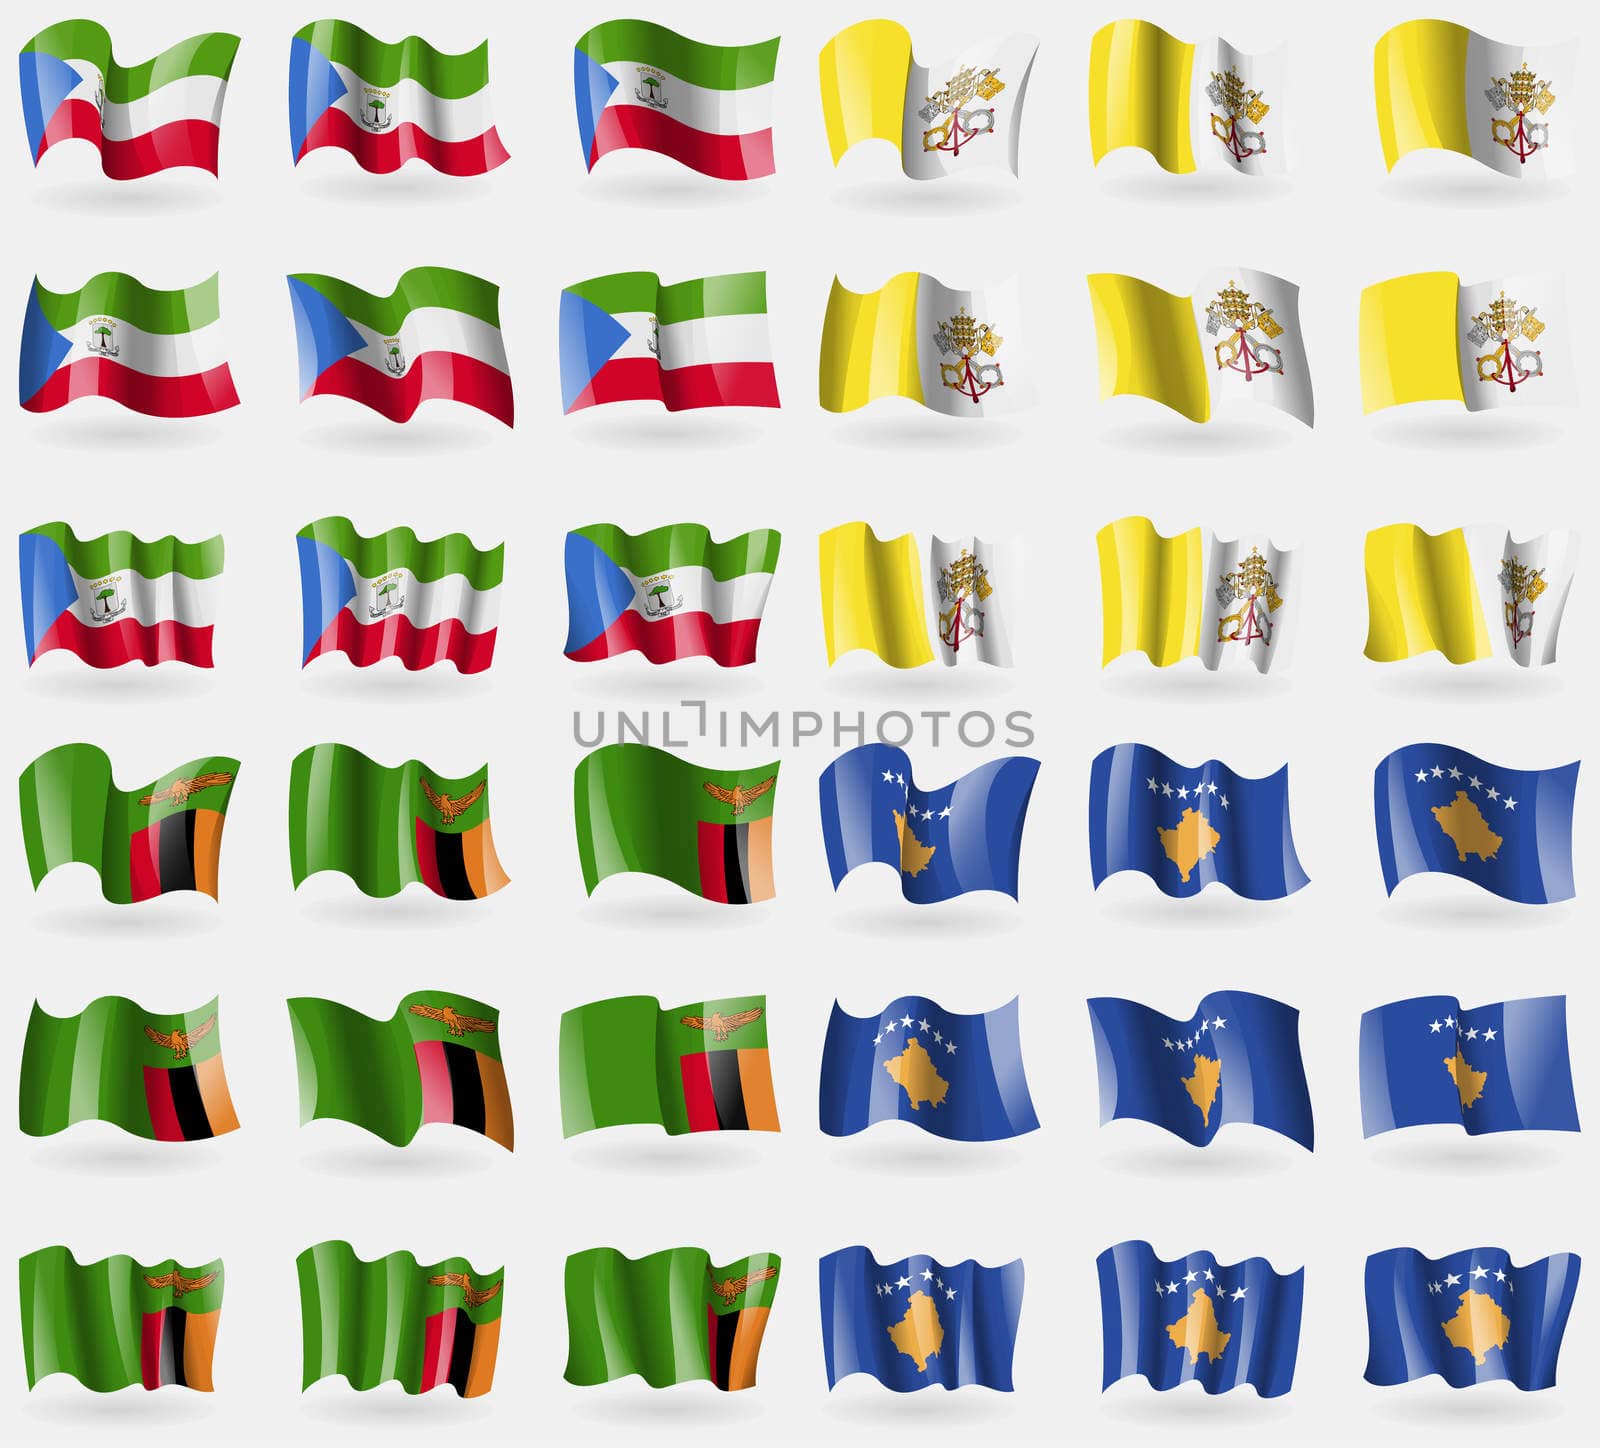 Equatorial Guinea, Vatican CityHoly See, Zambia, Kosovo. Set of 36 flags of the countries of the world. illustration